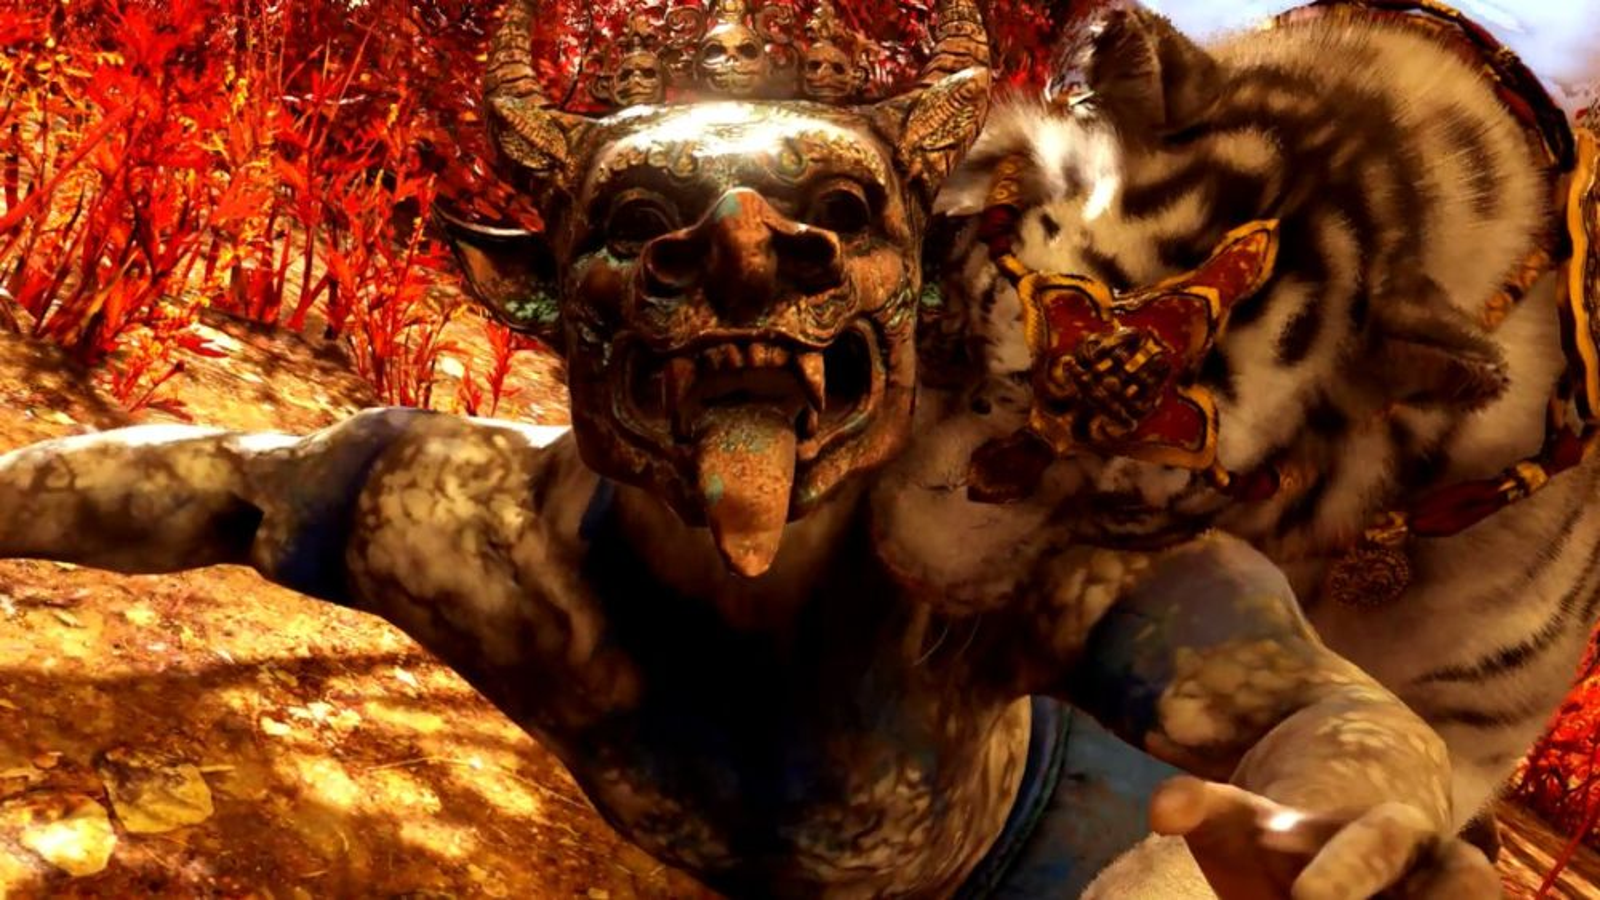 Stay Cool with Prime Gaming's June Offerings Including Far Cry 4